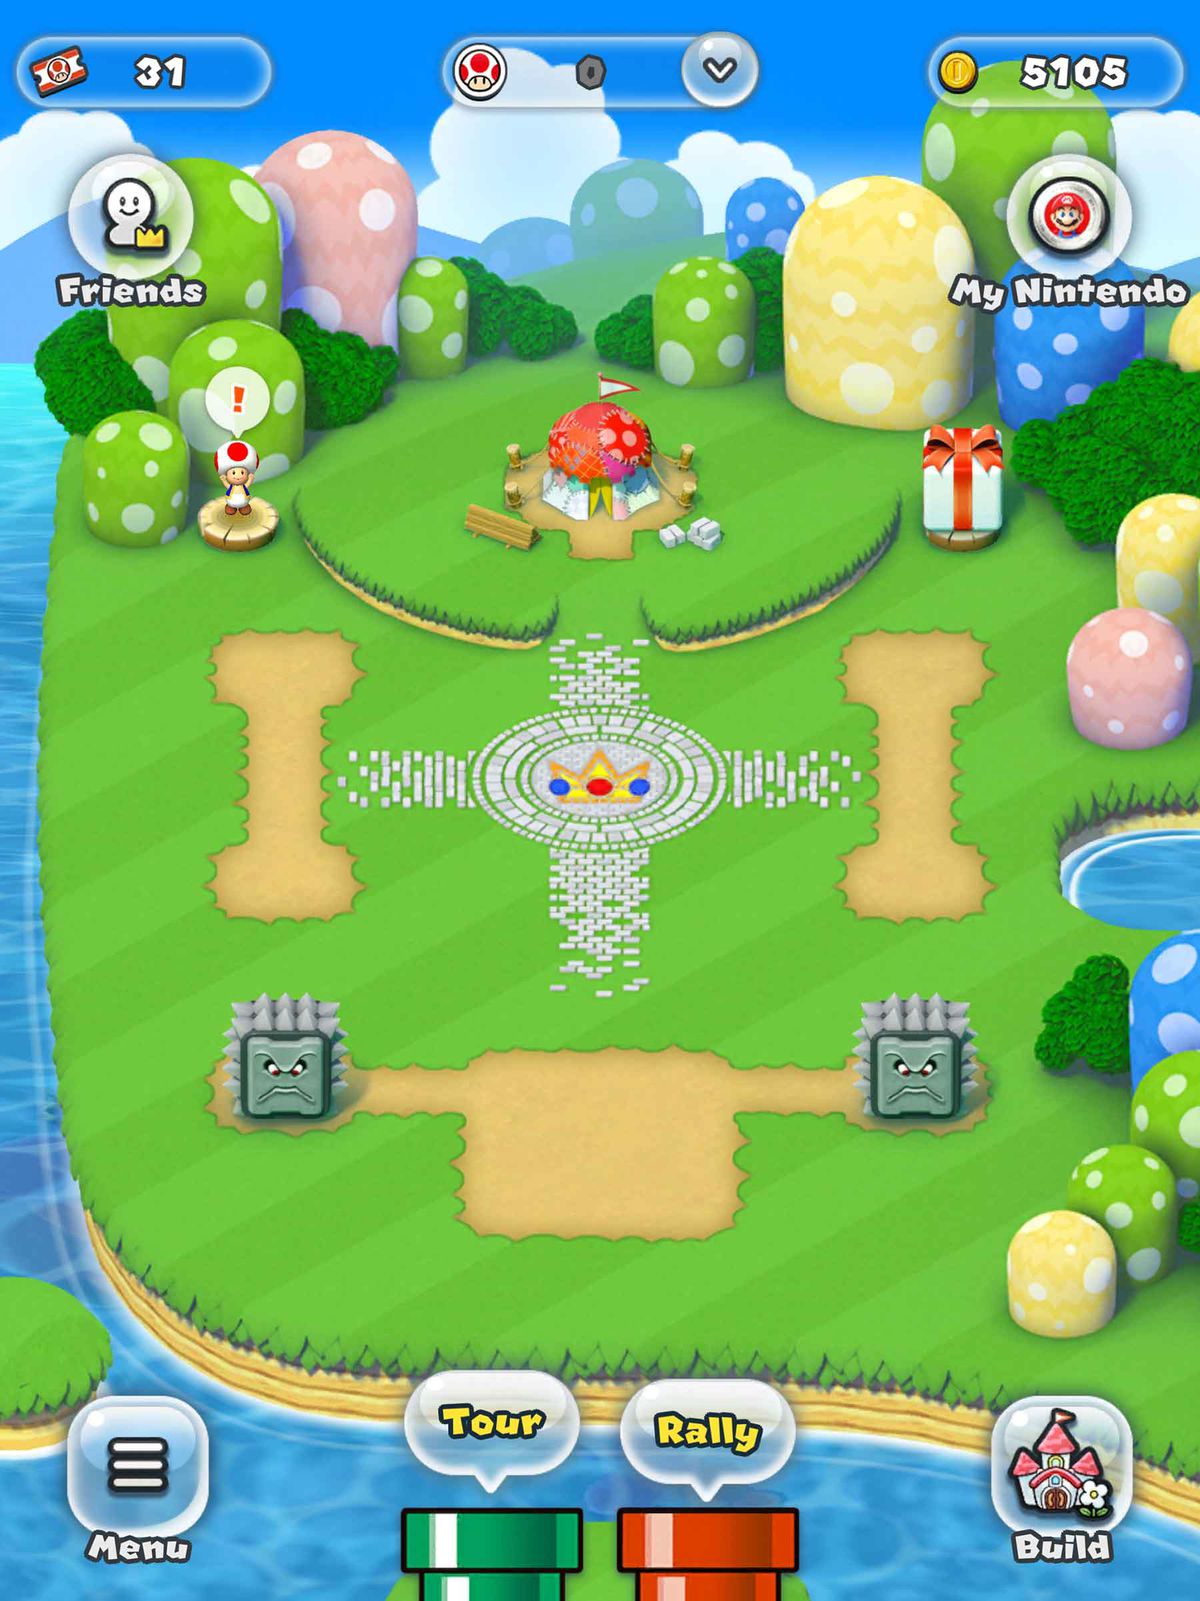 How to unlock and play as Toad in Super Mario Run